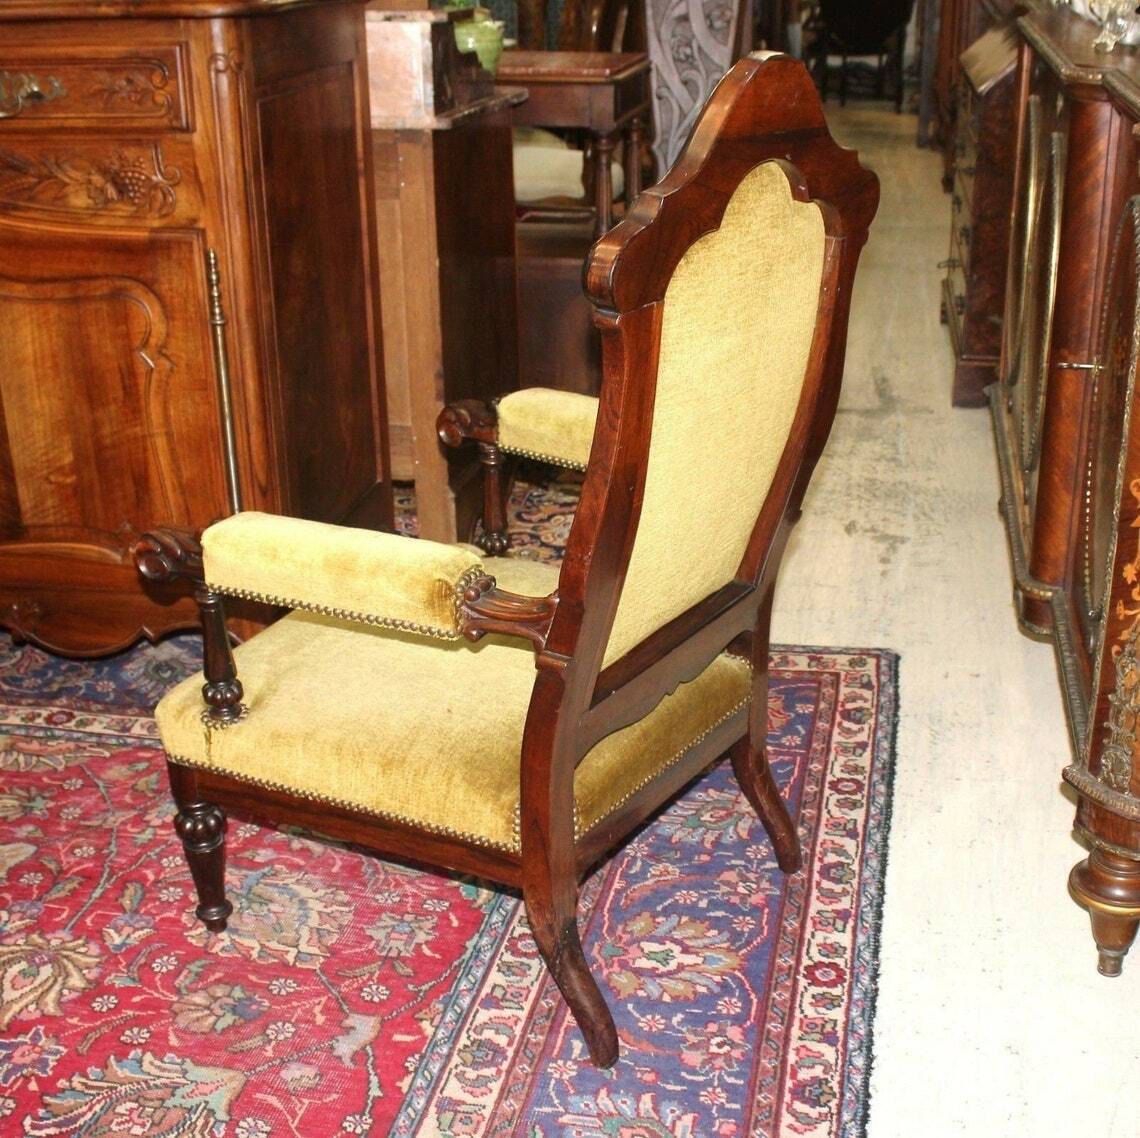 Antique Victorian chair style with monochrome upholstery